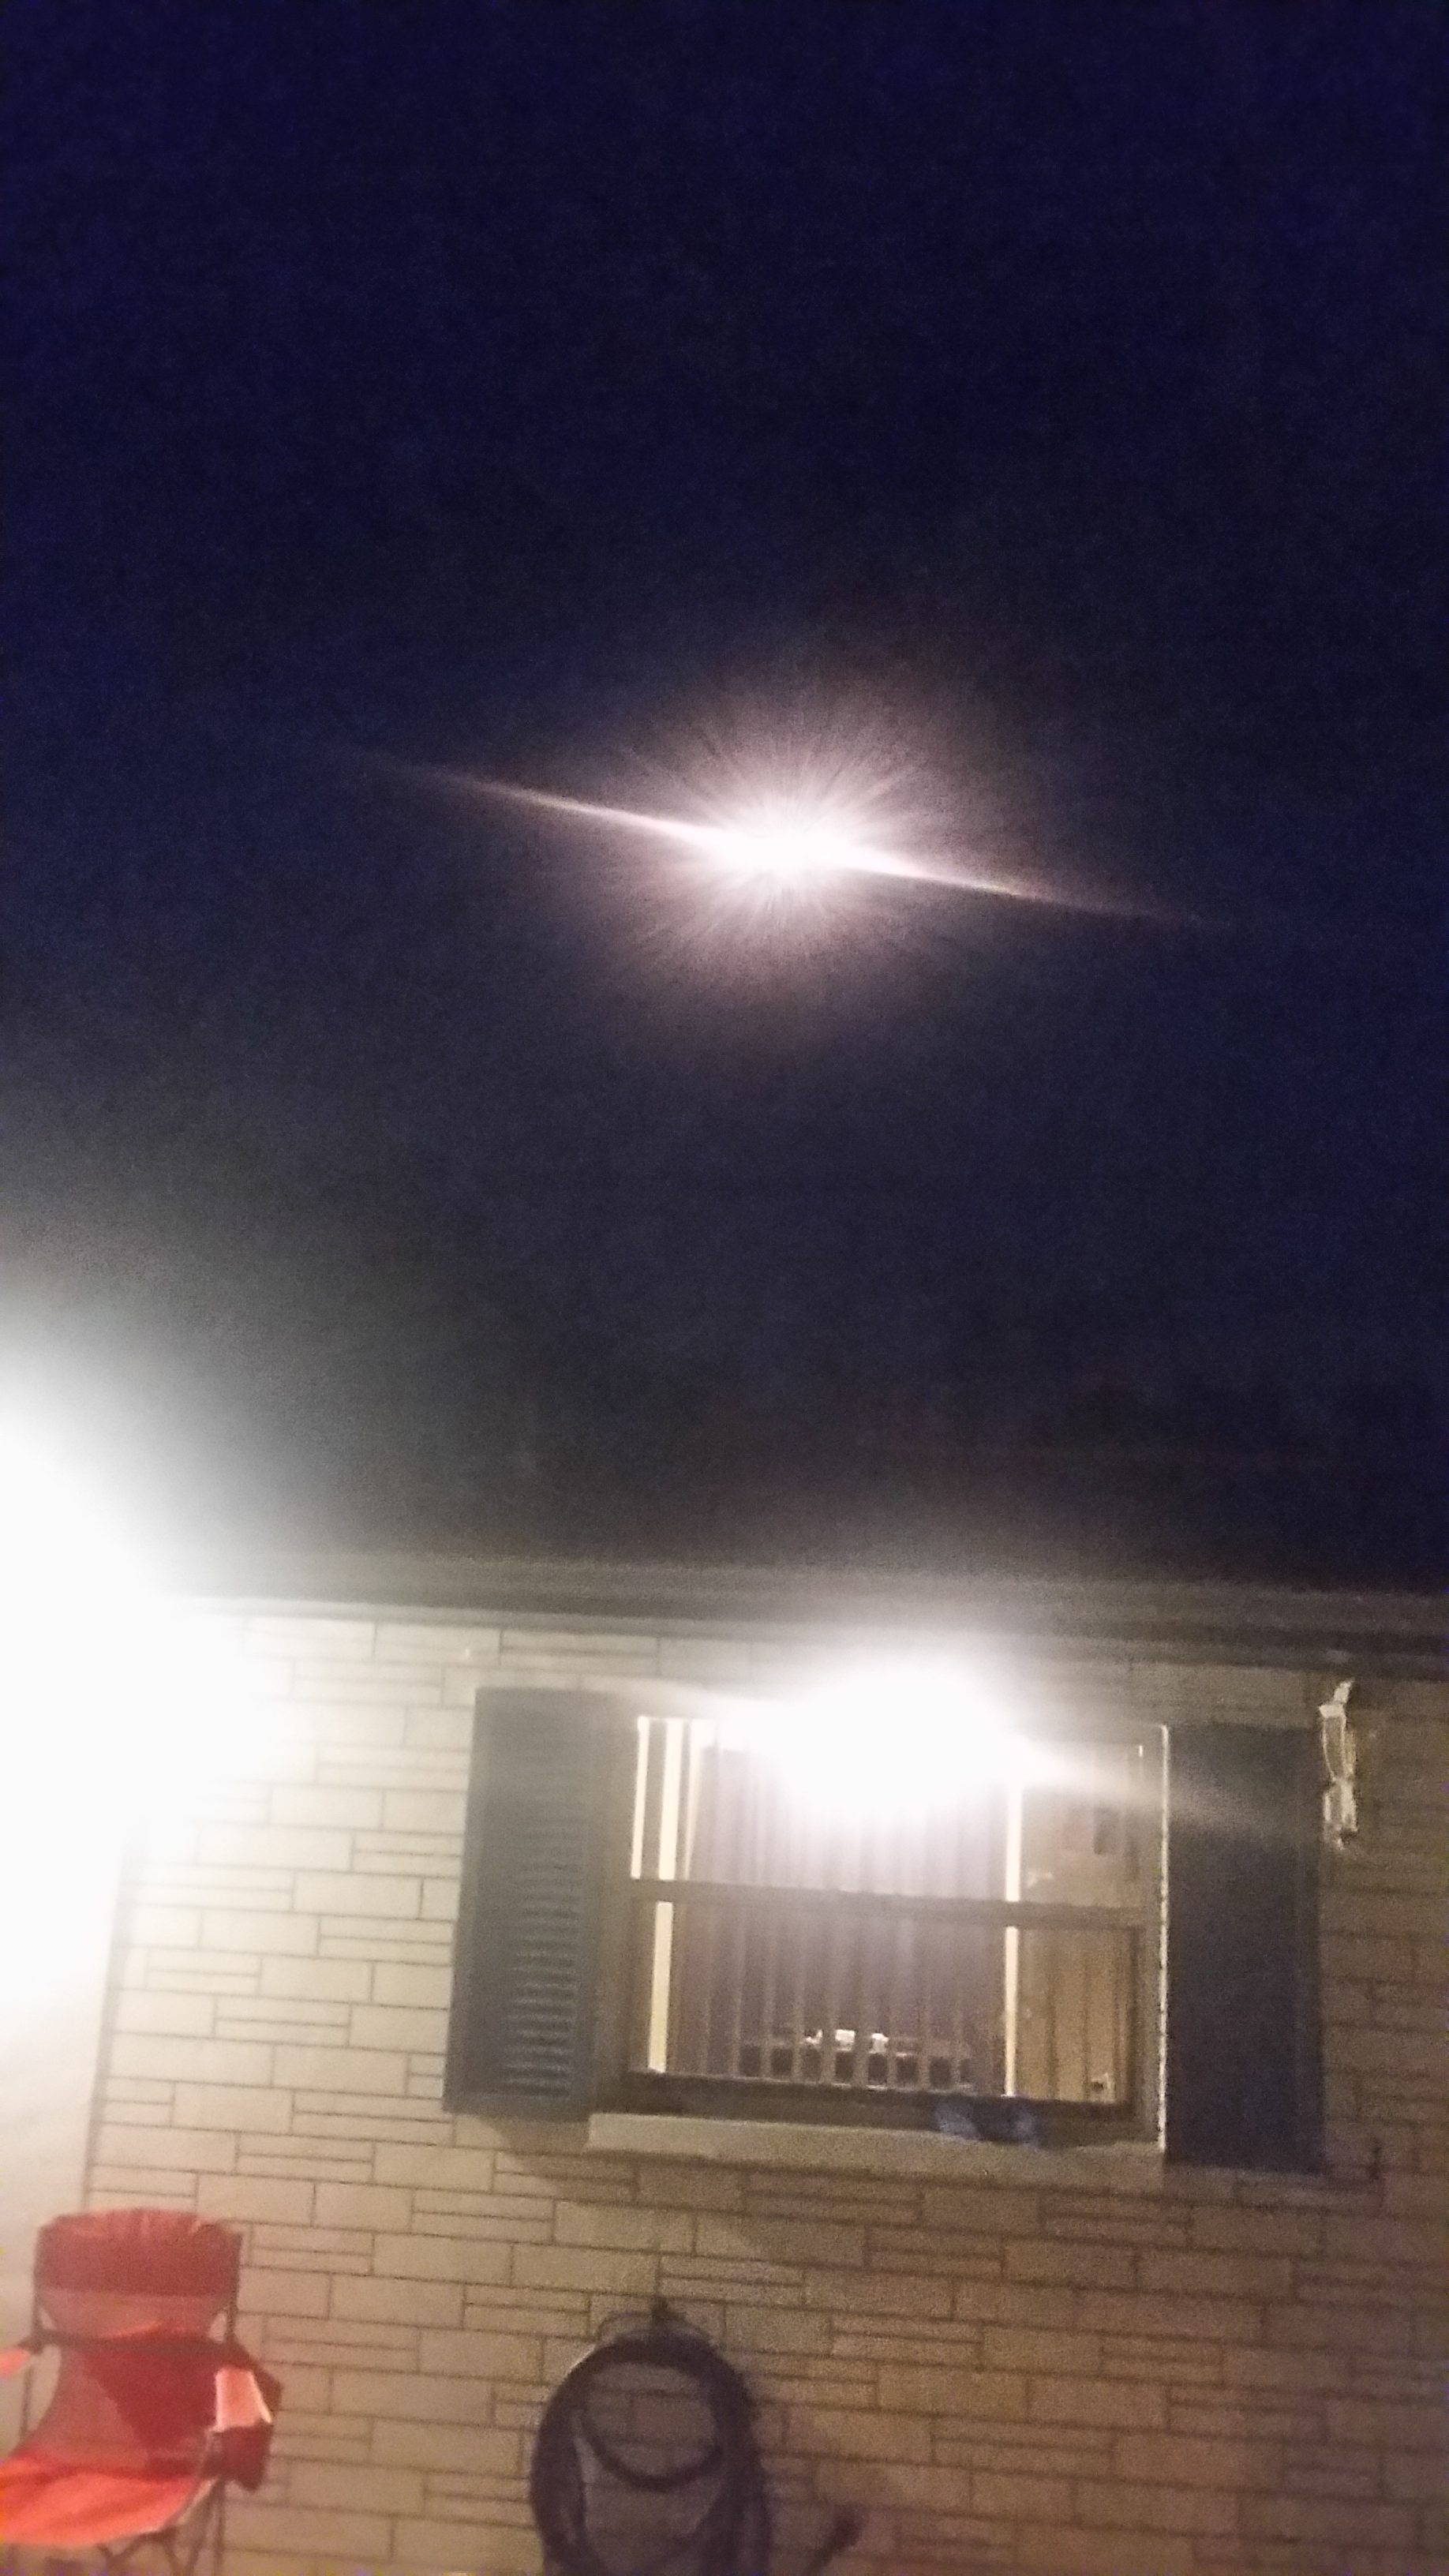 Atlas V/GOES-R launch as seen rising over neighbor houses in Titusville, Florida  on Nov. 19, 2016. Credit: Melissa Bayles